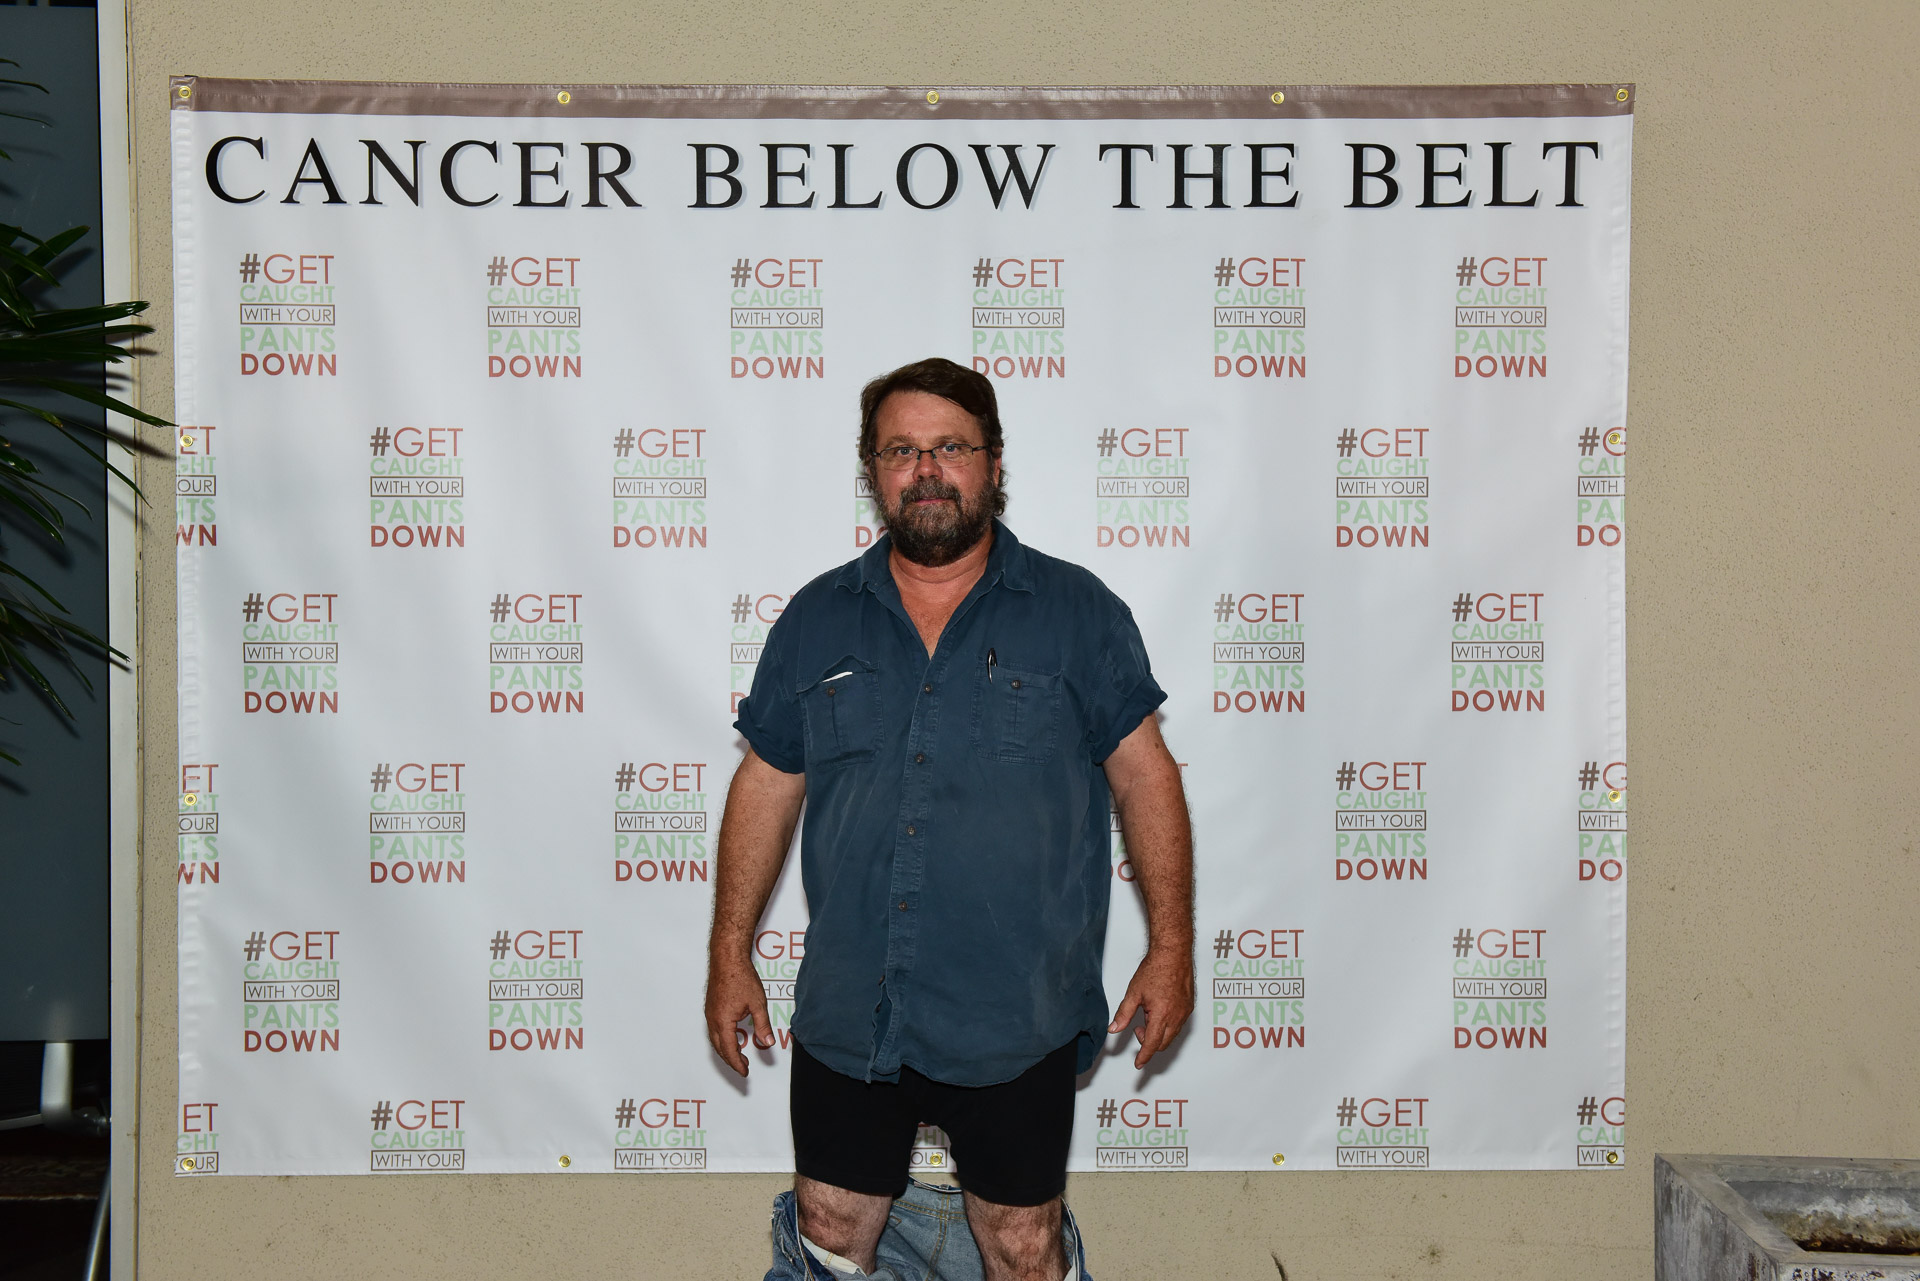 Below the Belt” cancers need our attention!